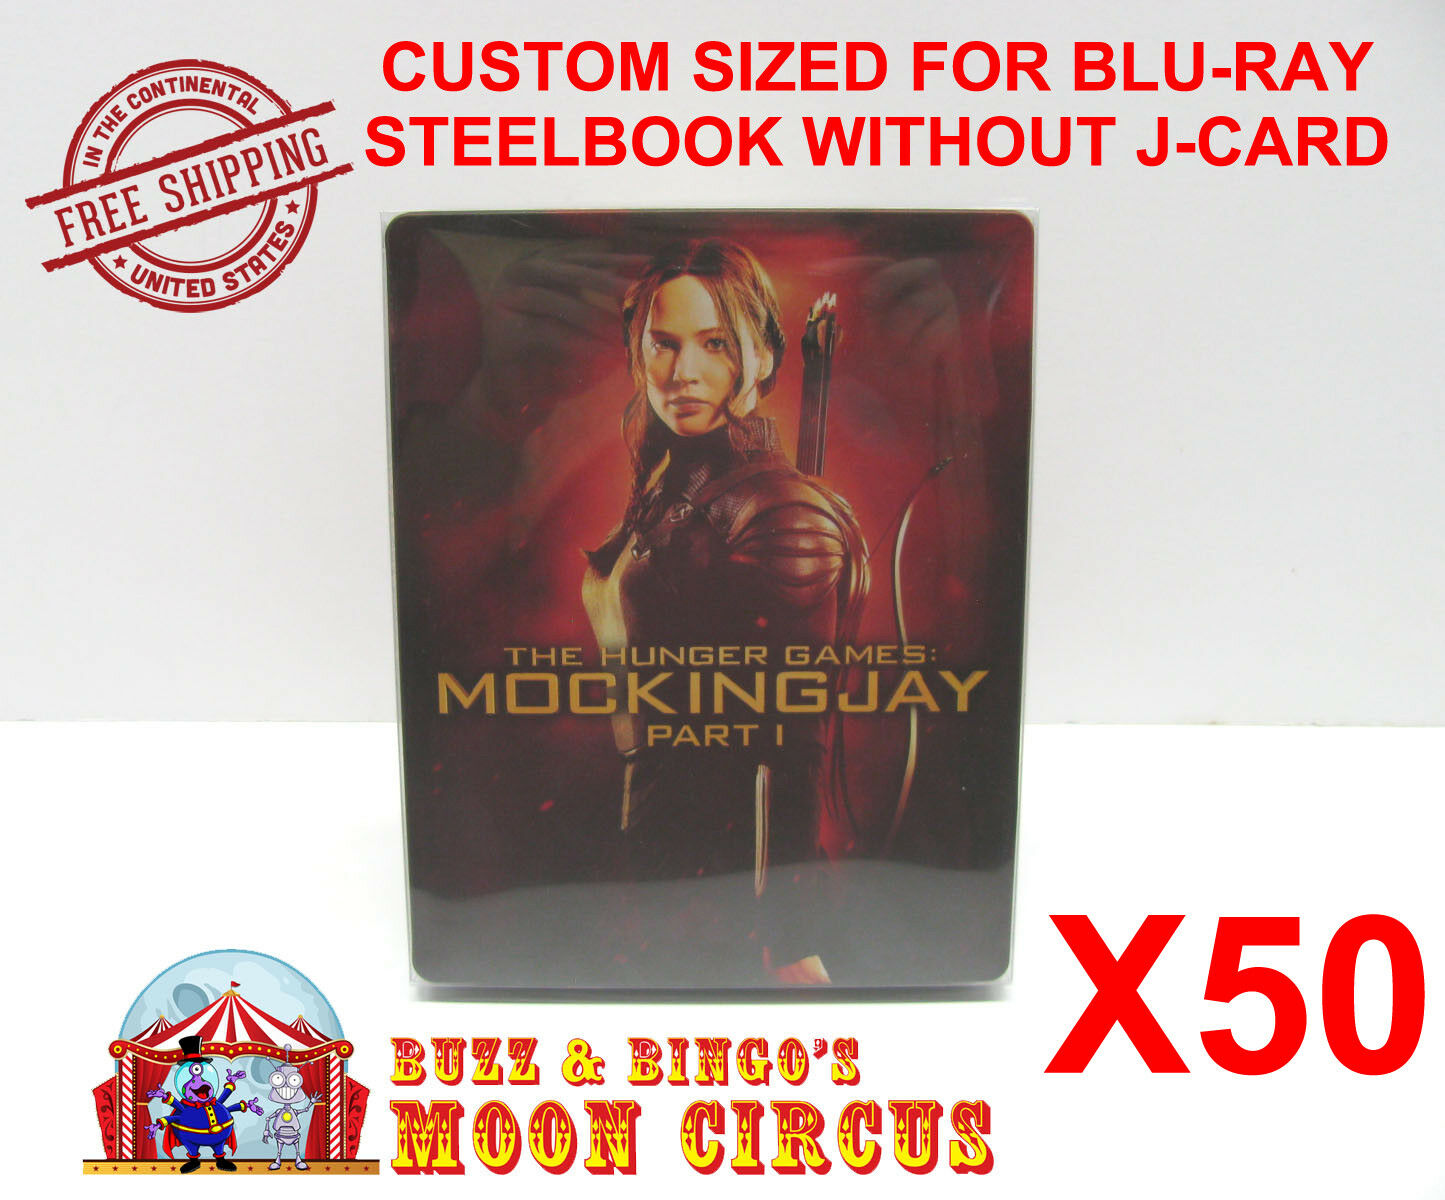 50x Blu-ray Steelbook Clear Protective Sleeve - Box Protectors - No J-card Size